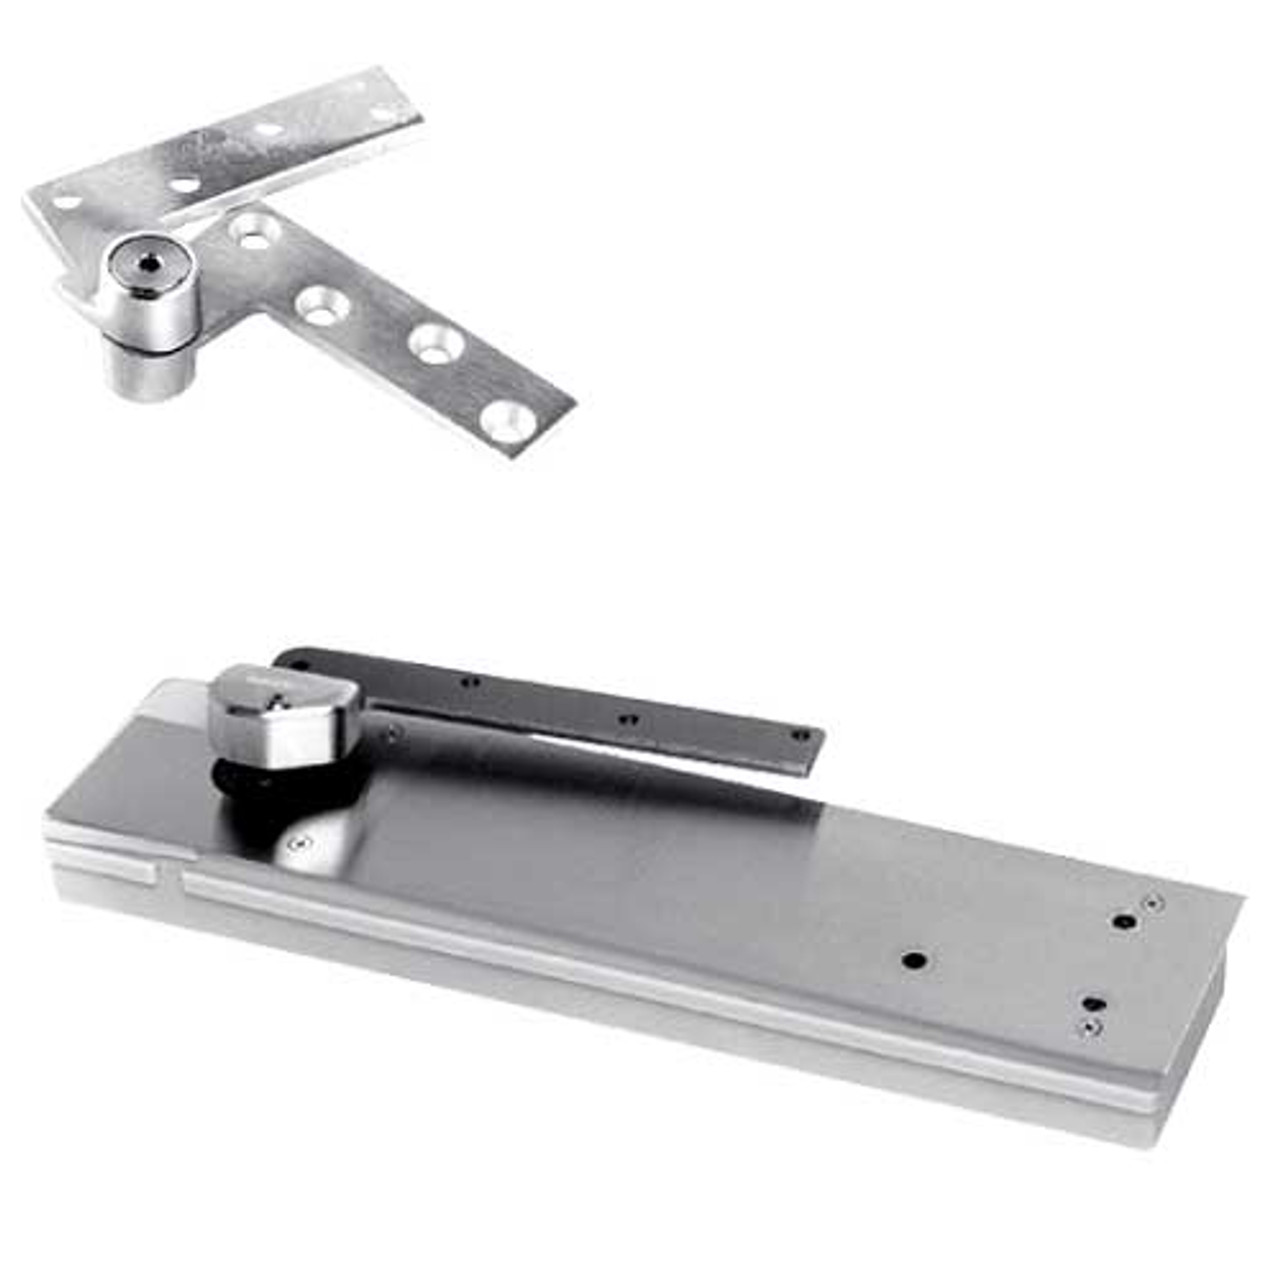 5103ABC180-1-1/2OS-LFP-LH-625 Rixson 51 Series 1-1/2" Offset Hung Shallow Depth Floor Closers in Bright Chrome Finish